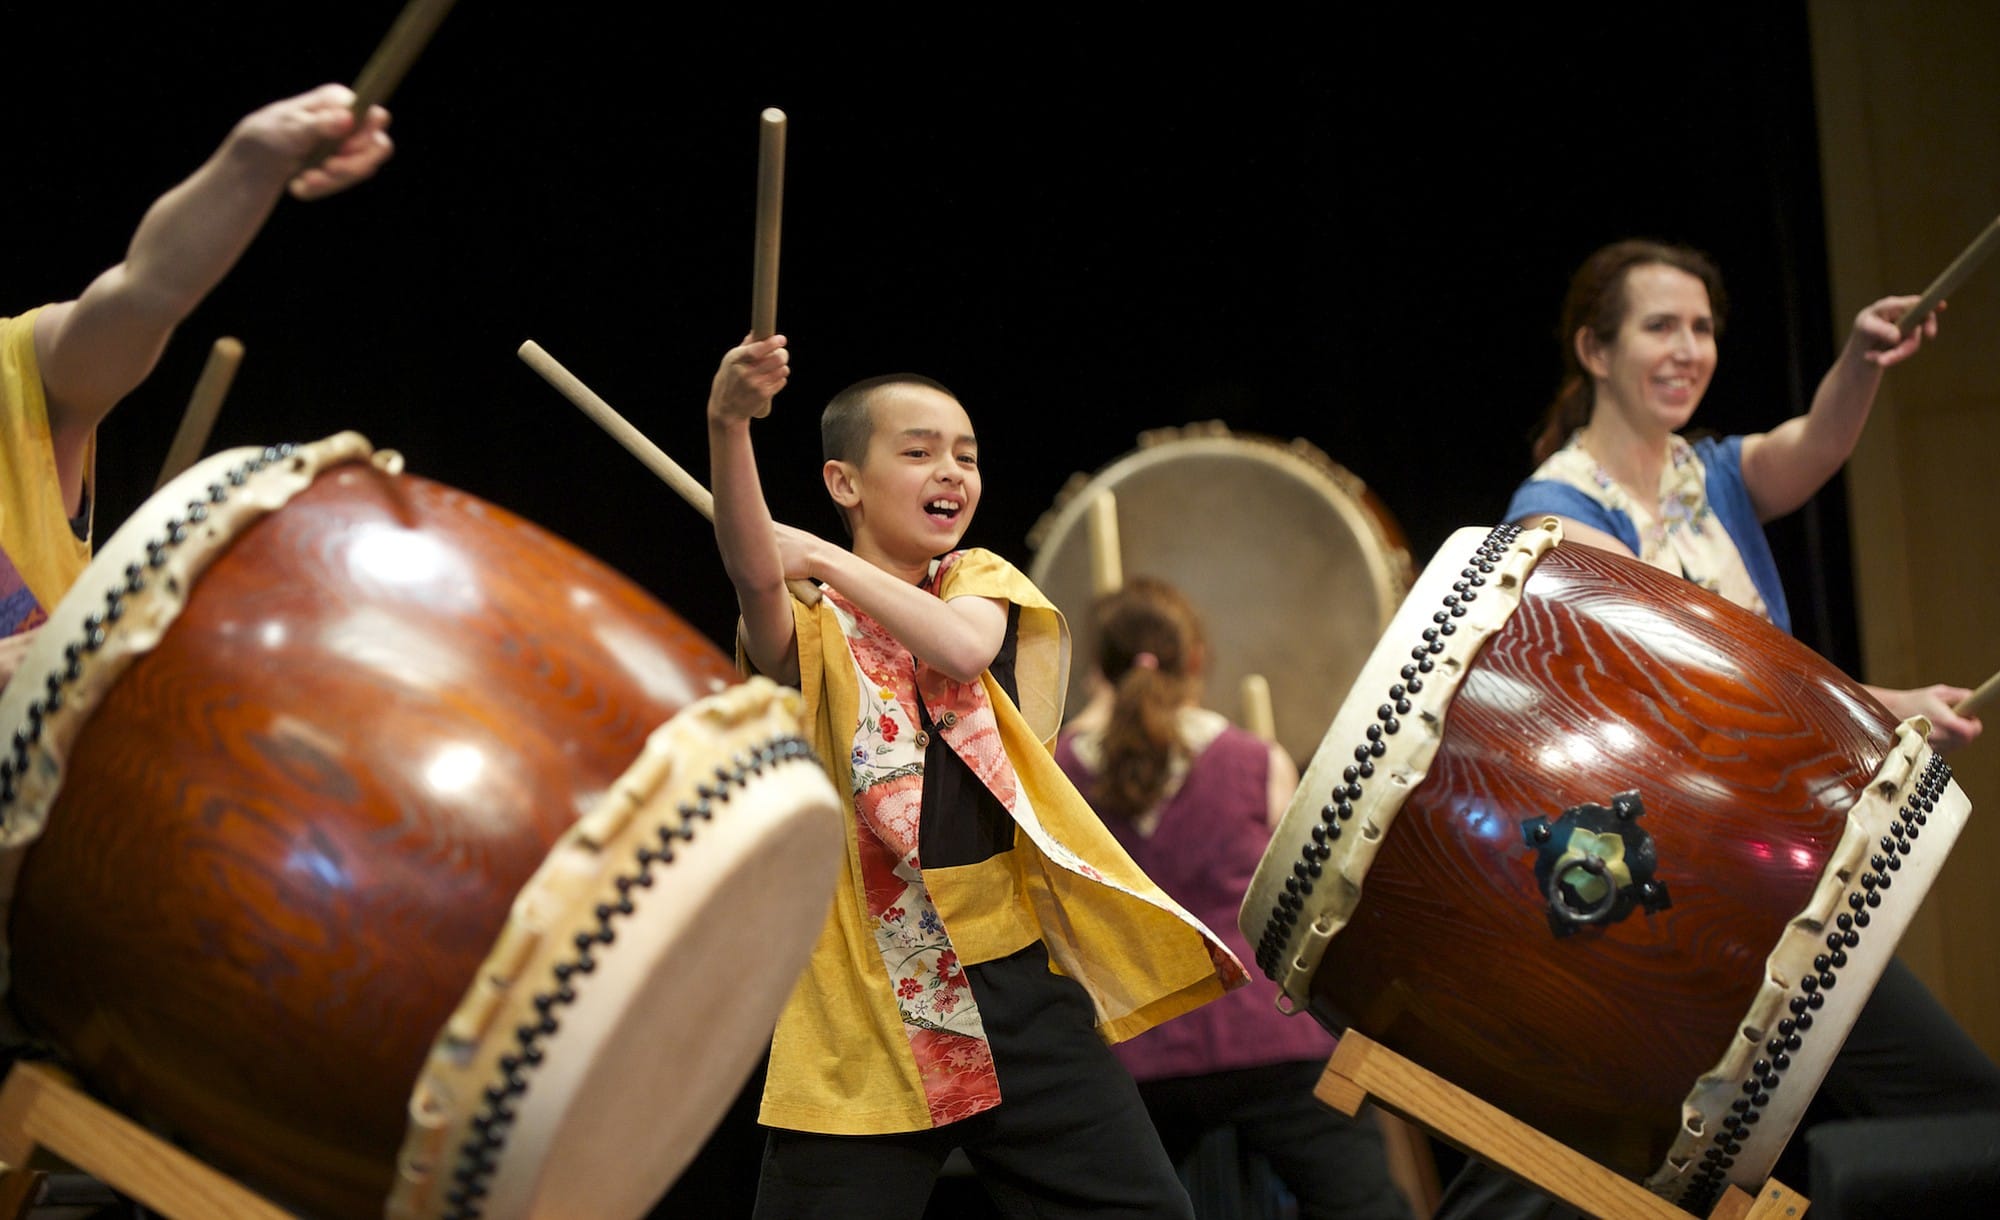 Photos by Steven Lane/The Columbian
Portland Taiko Drum Group performs at the 10th annual Clark College Sakura Festival on Thursday.